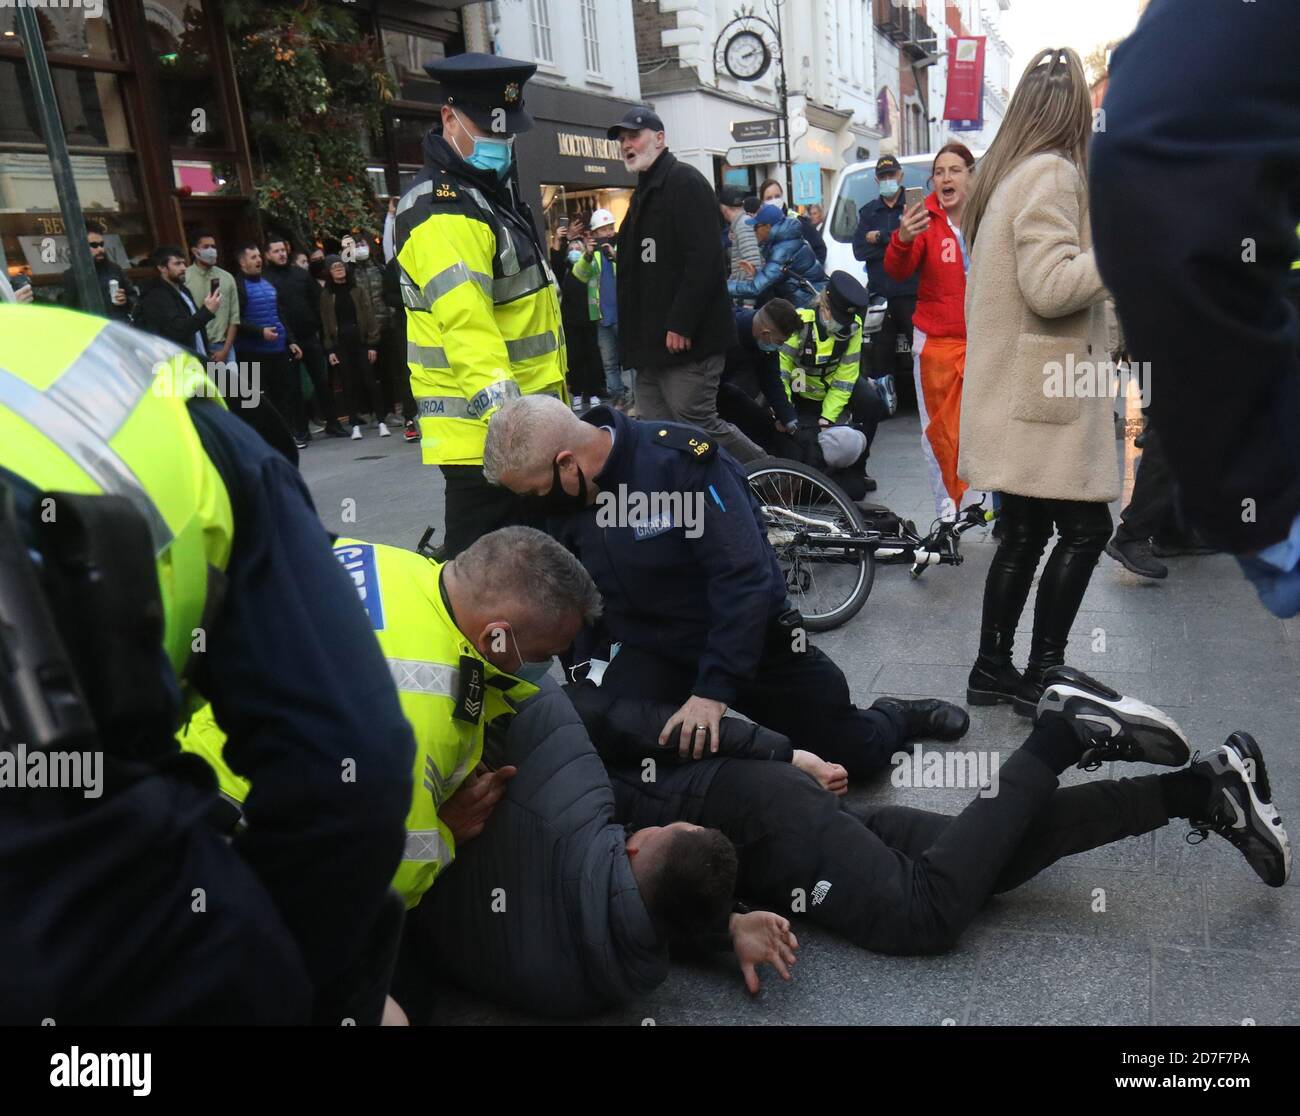 Dublin, Ireland. 22nd Oct 2020. 22/10/2020 Covid-19 Pandemic (Coronavirus), Ireland. Day 210 since start of lockdown. Day 1 of nationwide Level 5 lockdown. An anti-lockdown protest turns violent today, as protestors on Grafton Street are arrested by Gardai. Photograph: Leah Farrell / RollingNews.ie Credit: RollingNews.ie/Alamy Live News Stock Photo